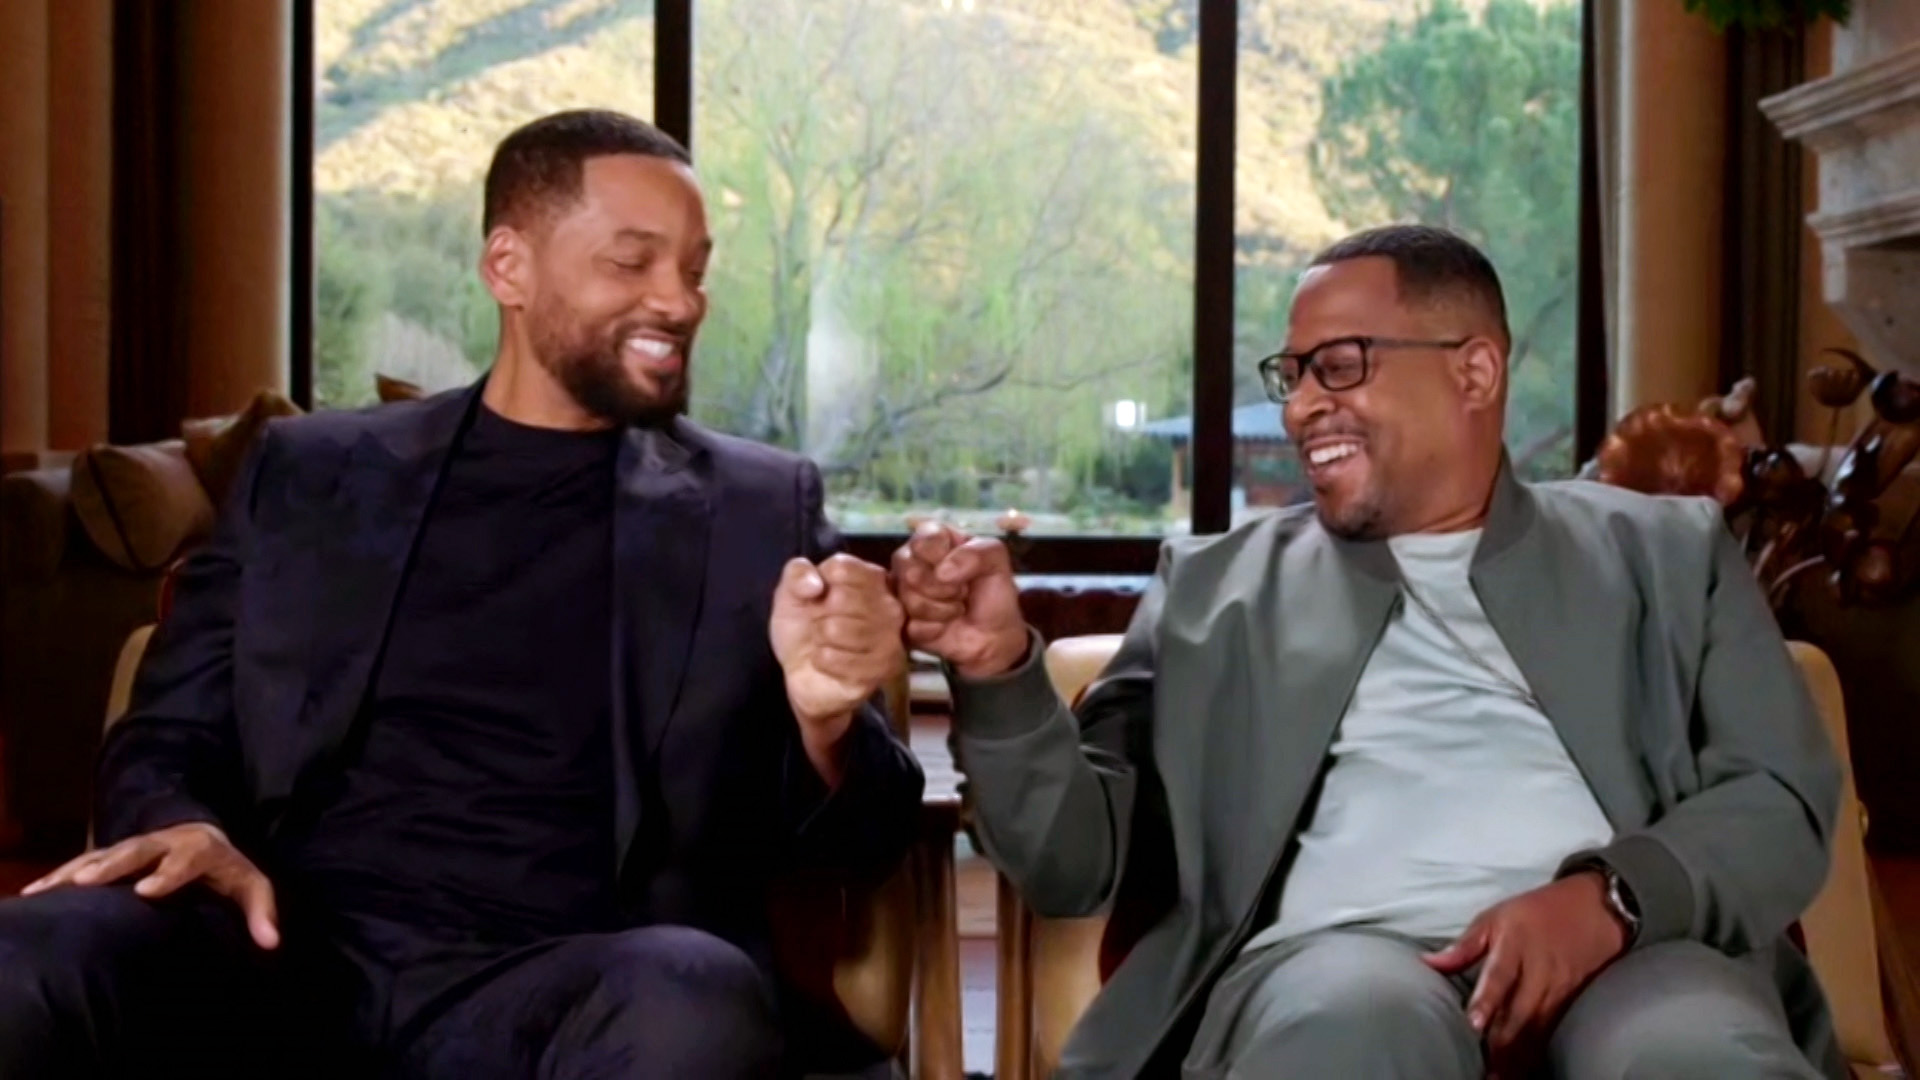 Bad Boys 4 Confirmed By Will Smith & Martin Lawrence In IG Post